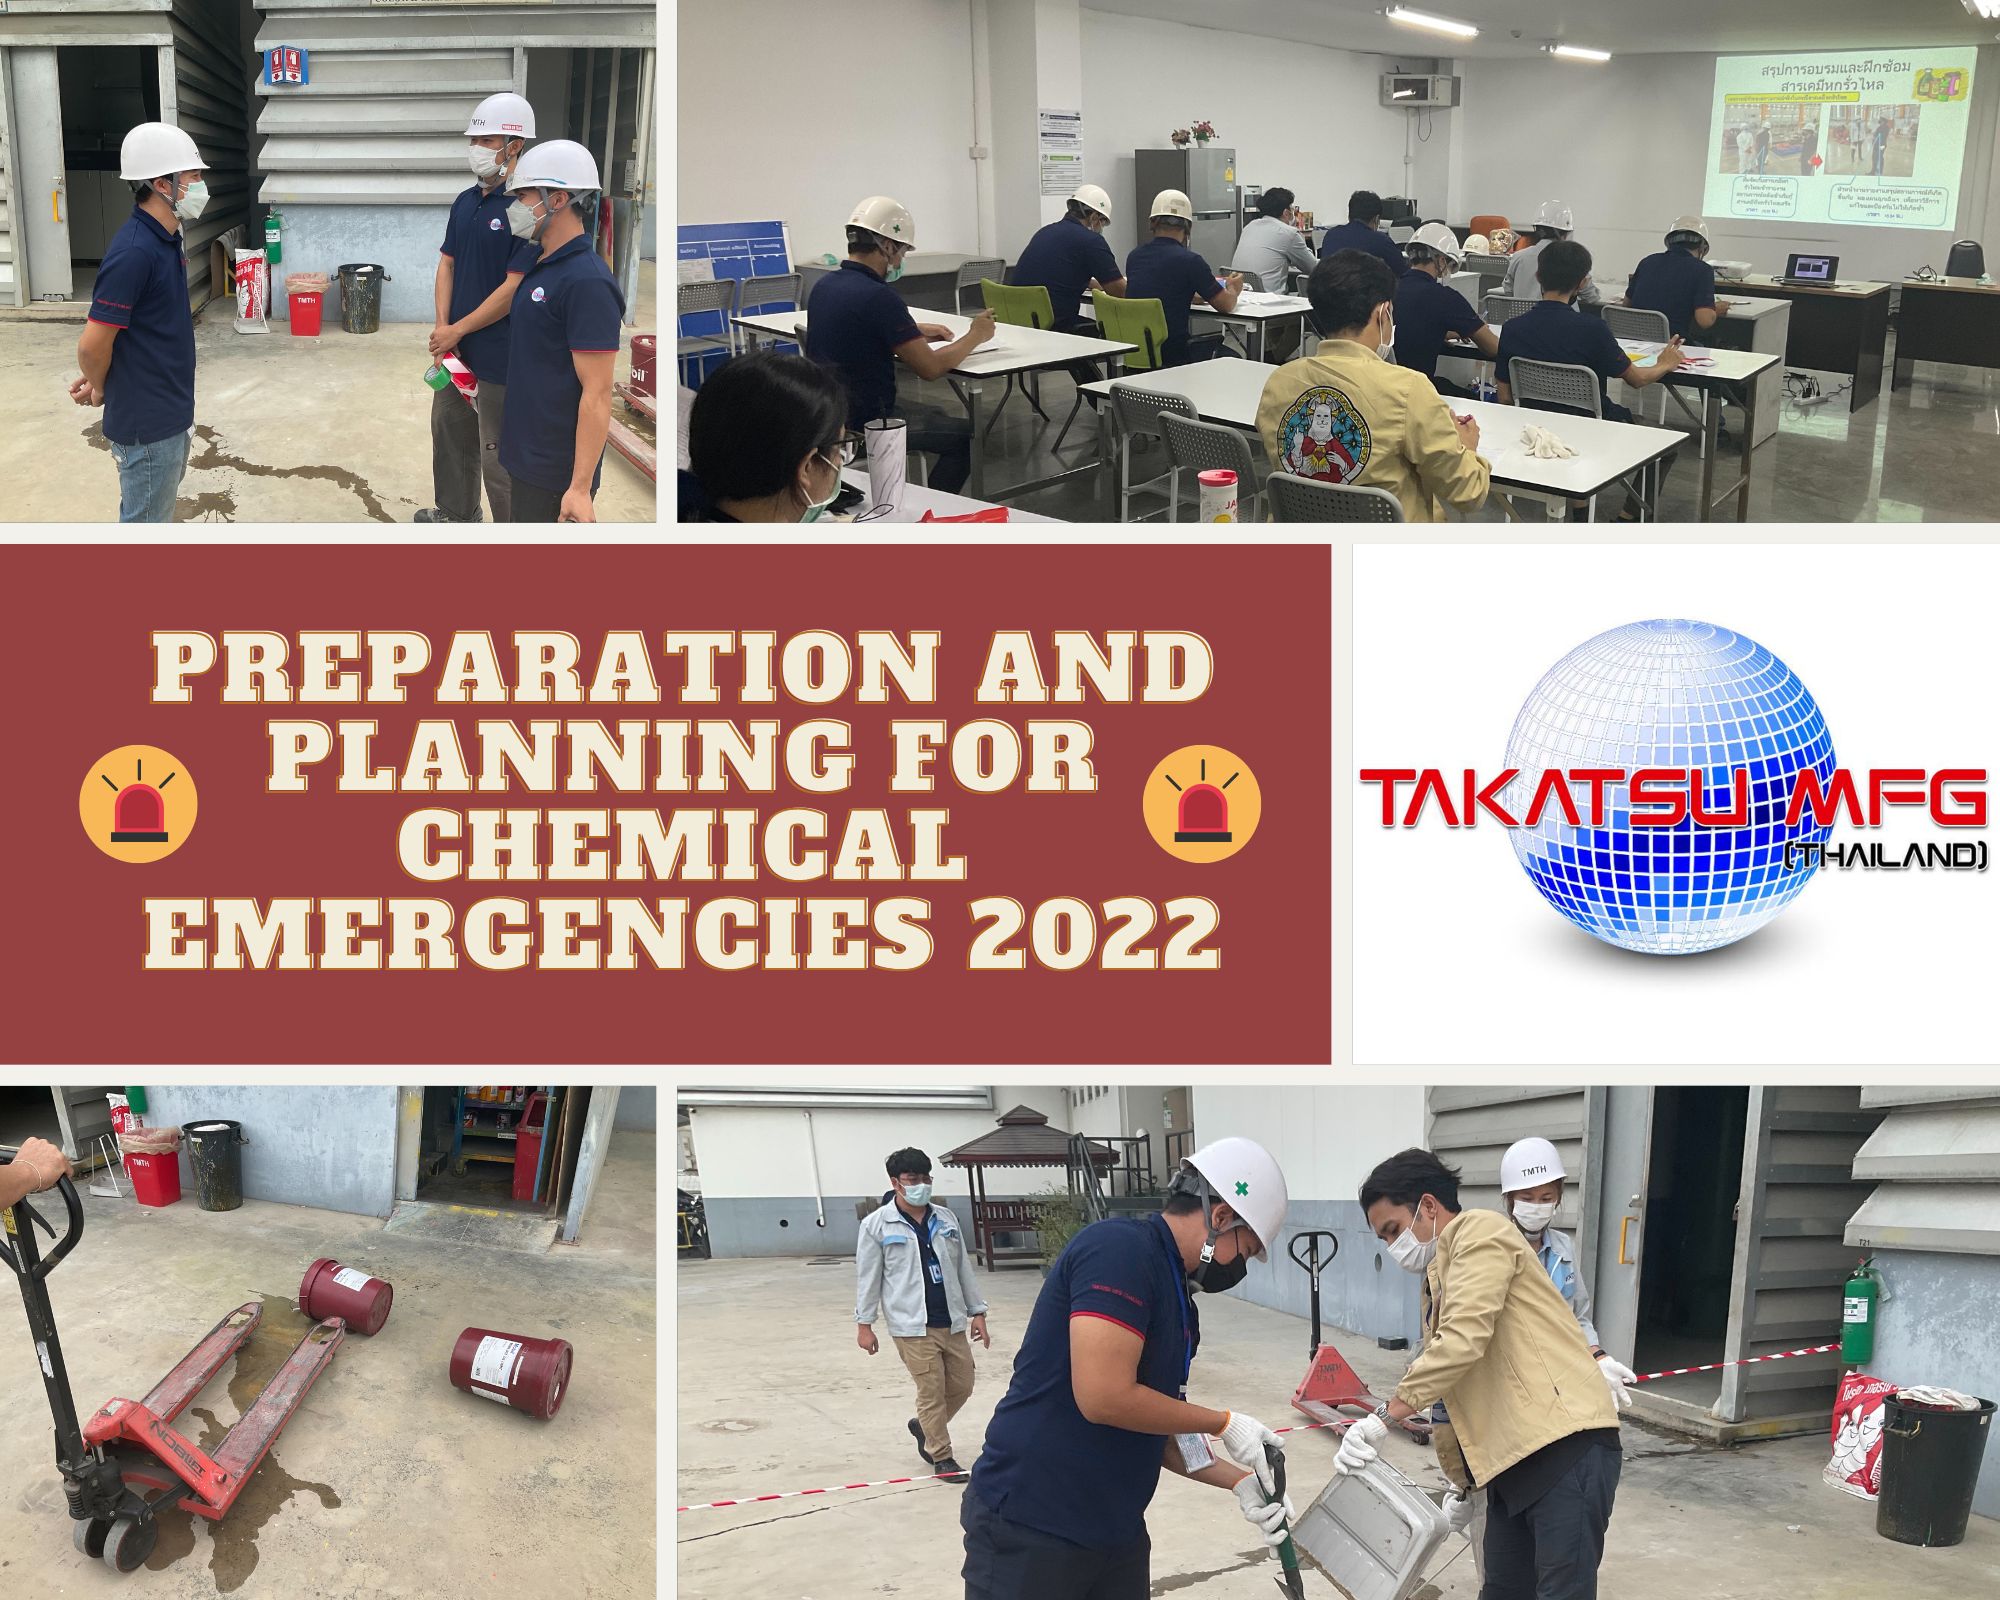 PREPARATION AND PLANNING FOR CHEMICAL EMERGENCIES 2022